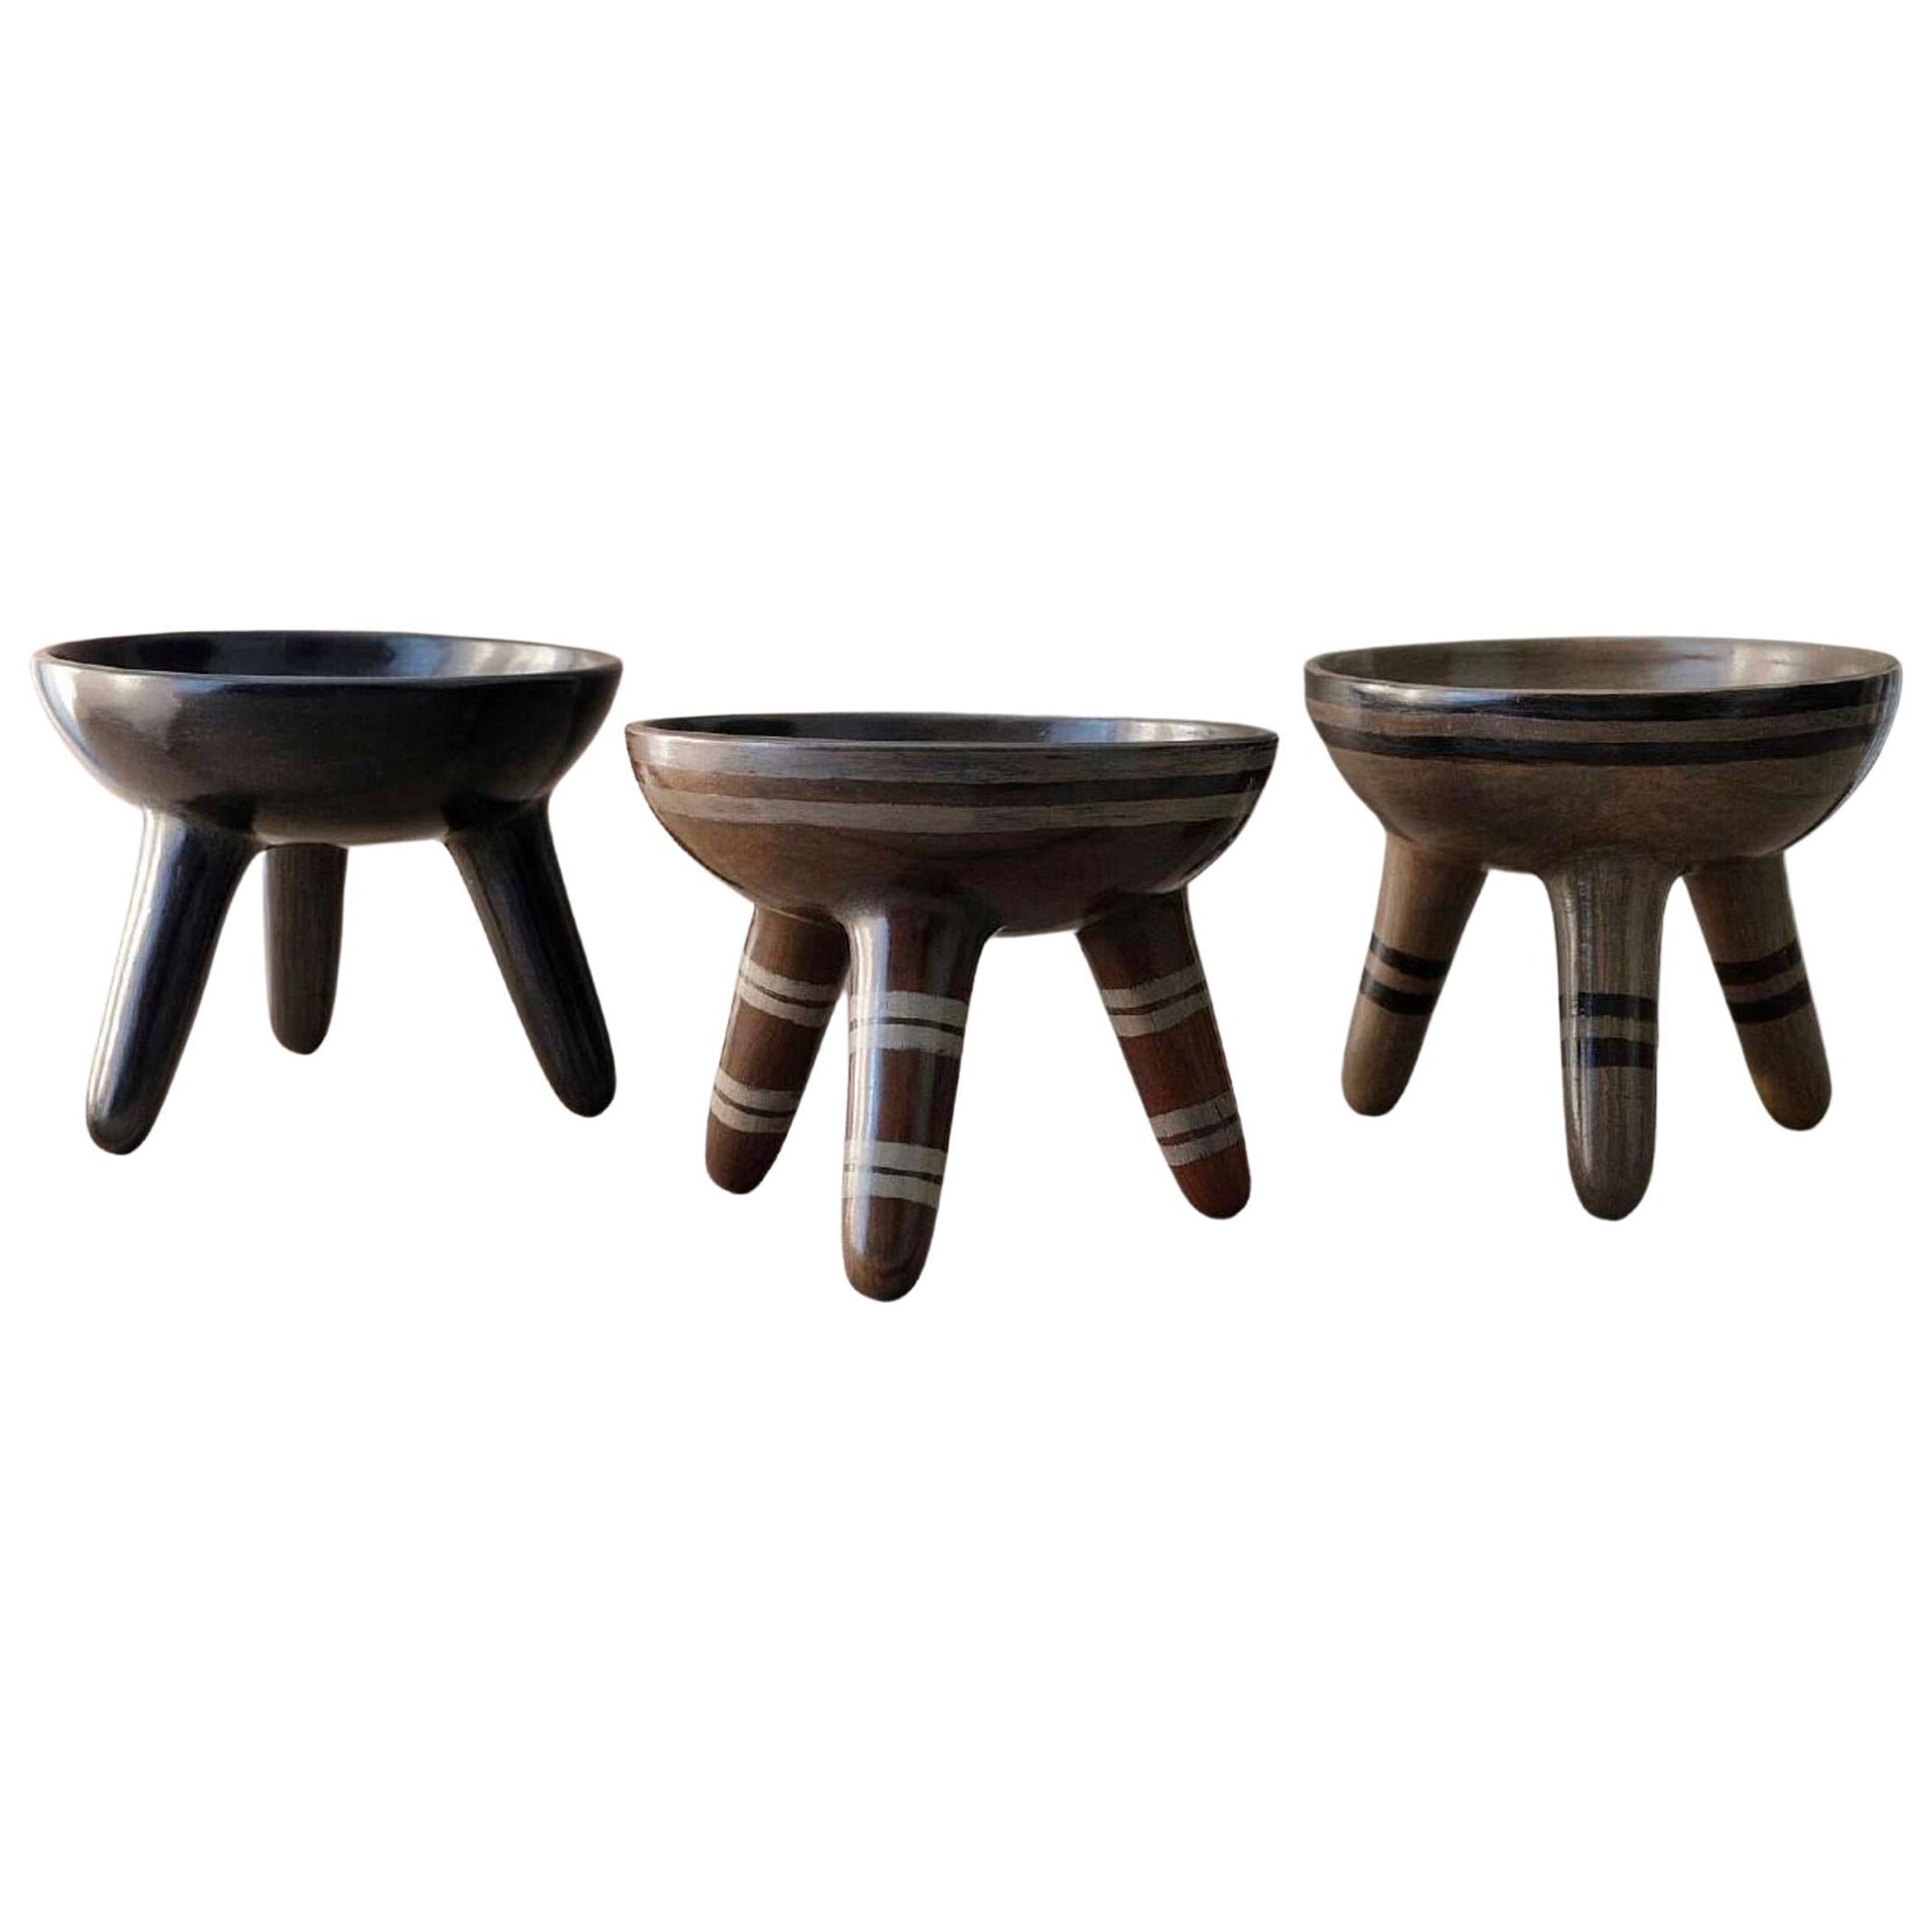 Set of 3 Acatlán Zoquitl Bowl by Onora For Sale